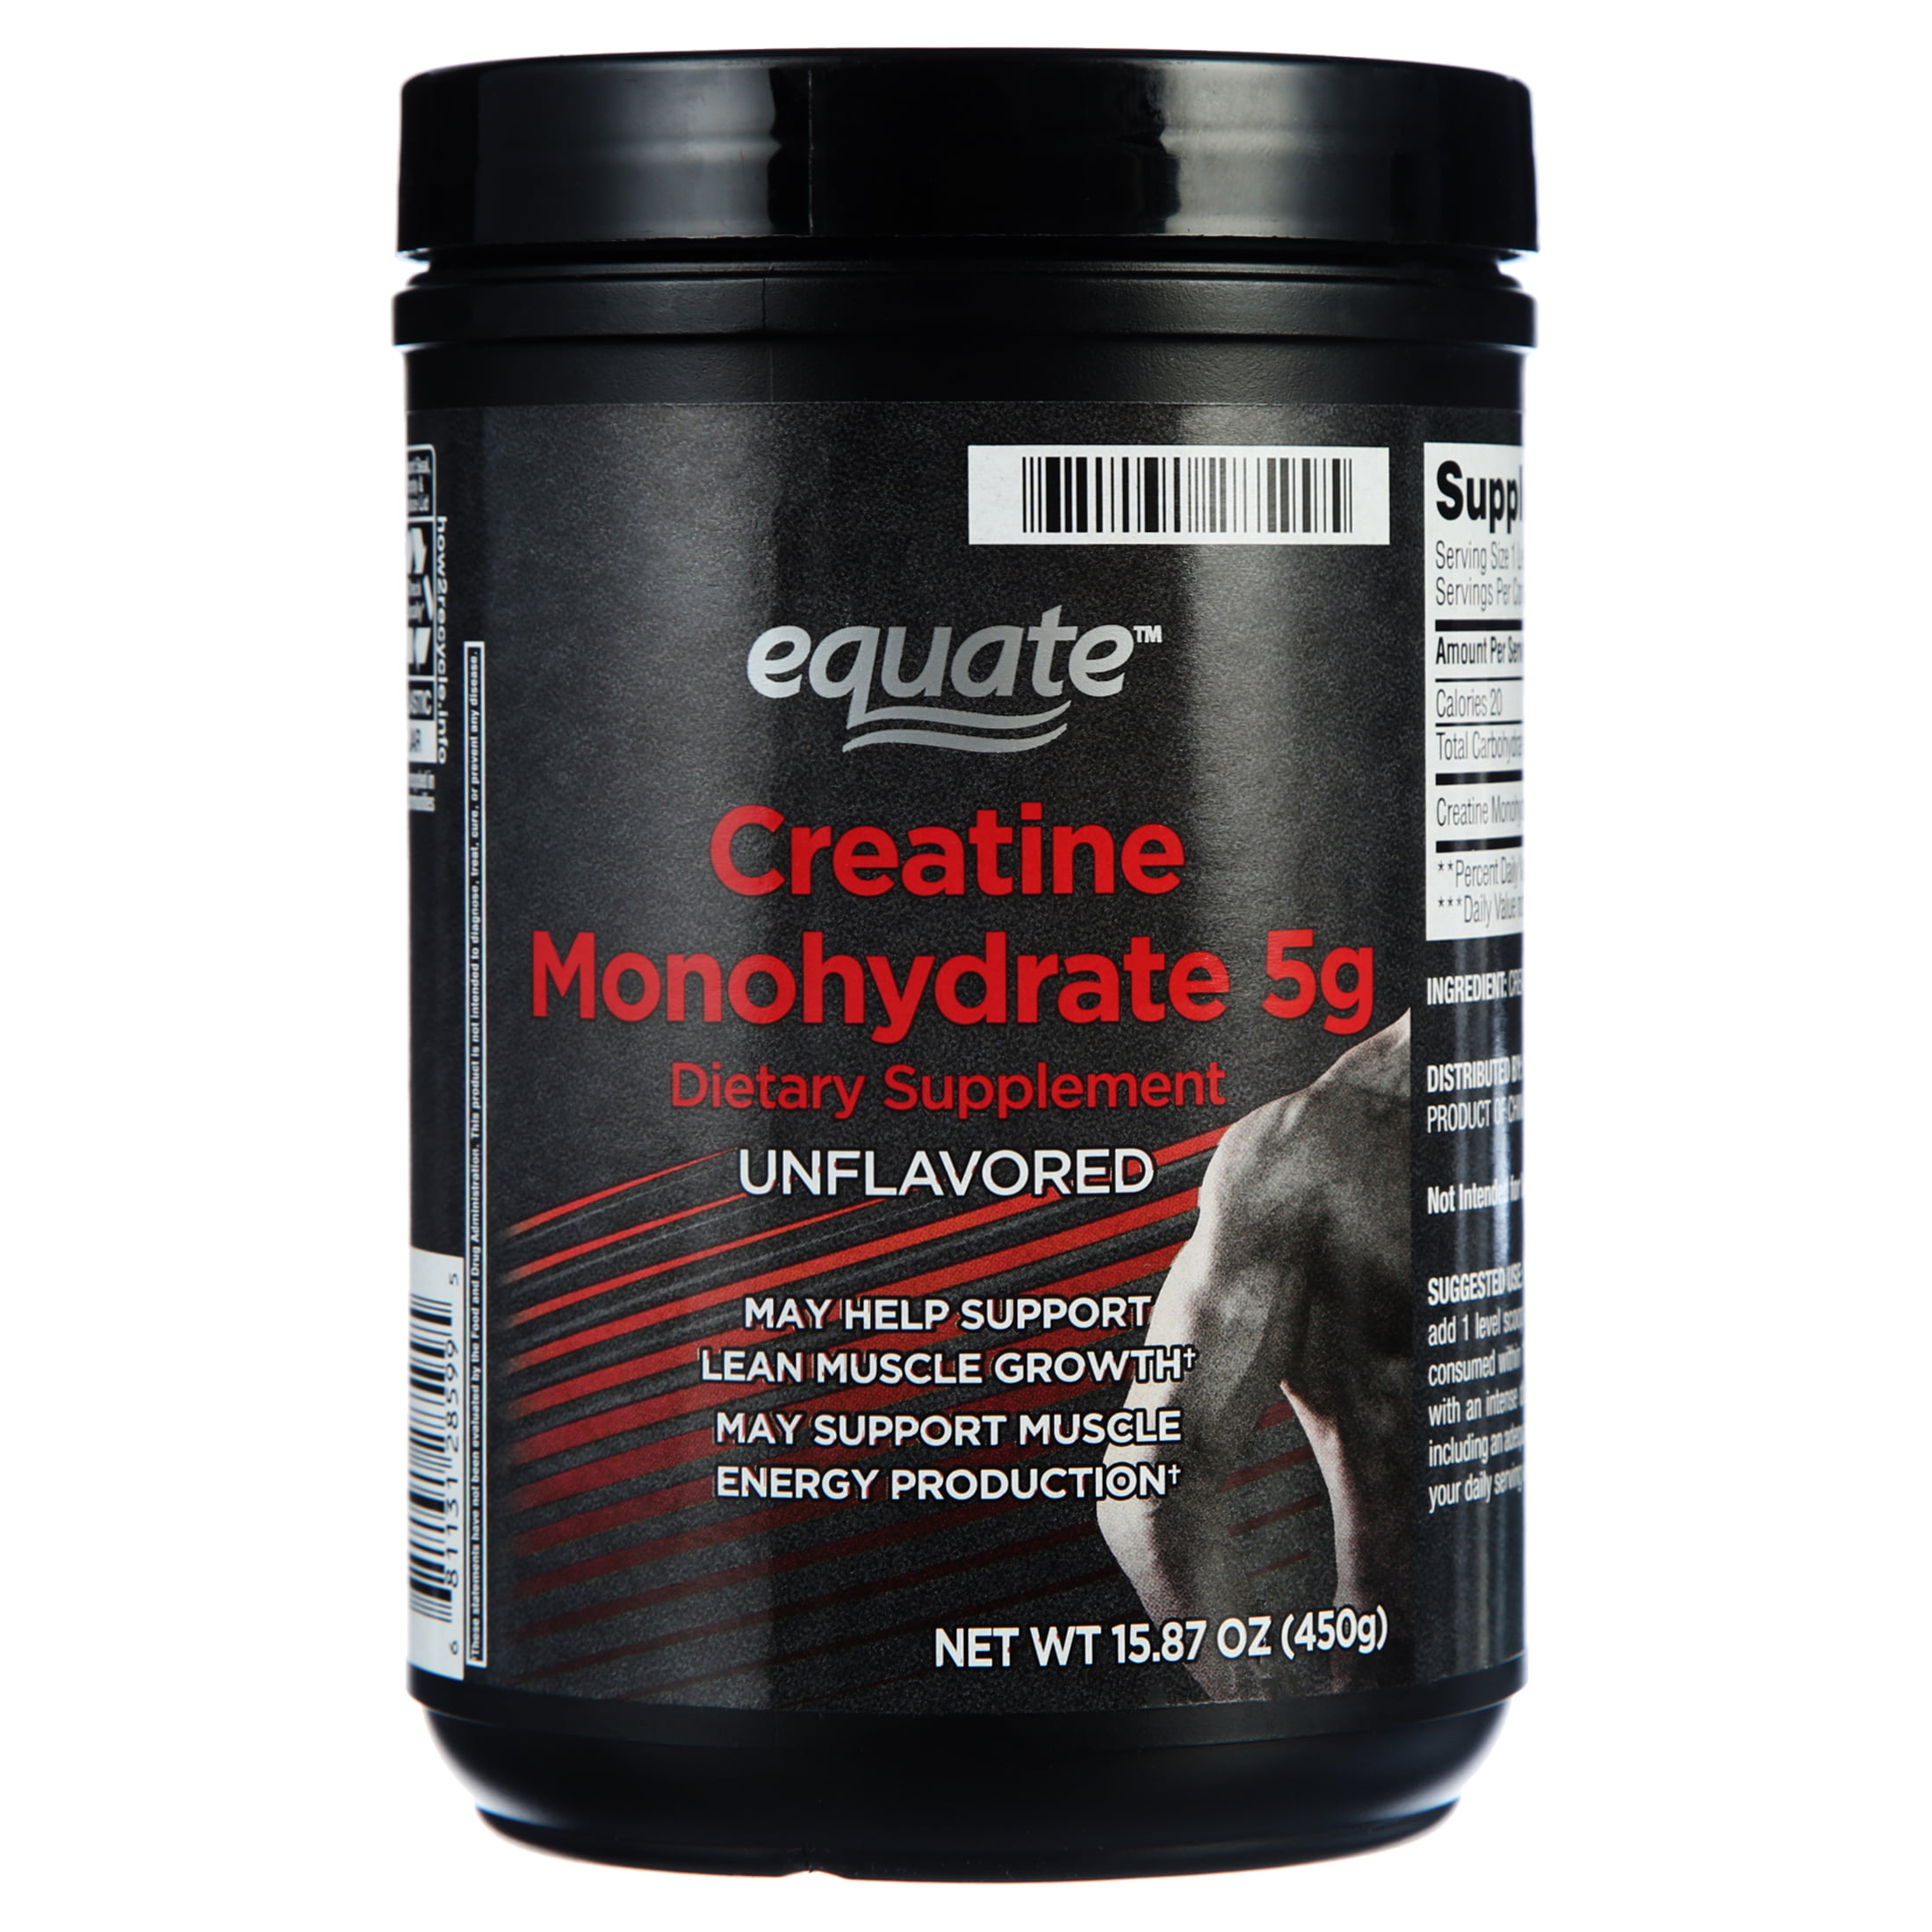 Equate Creatine Monohydrate Dietary Supplement, Unflavored, 5 g, 15.87 oz